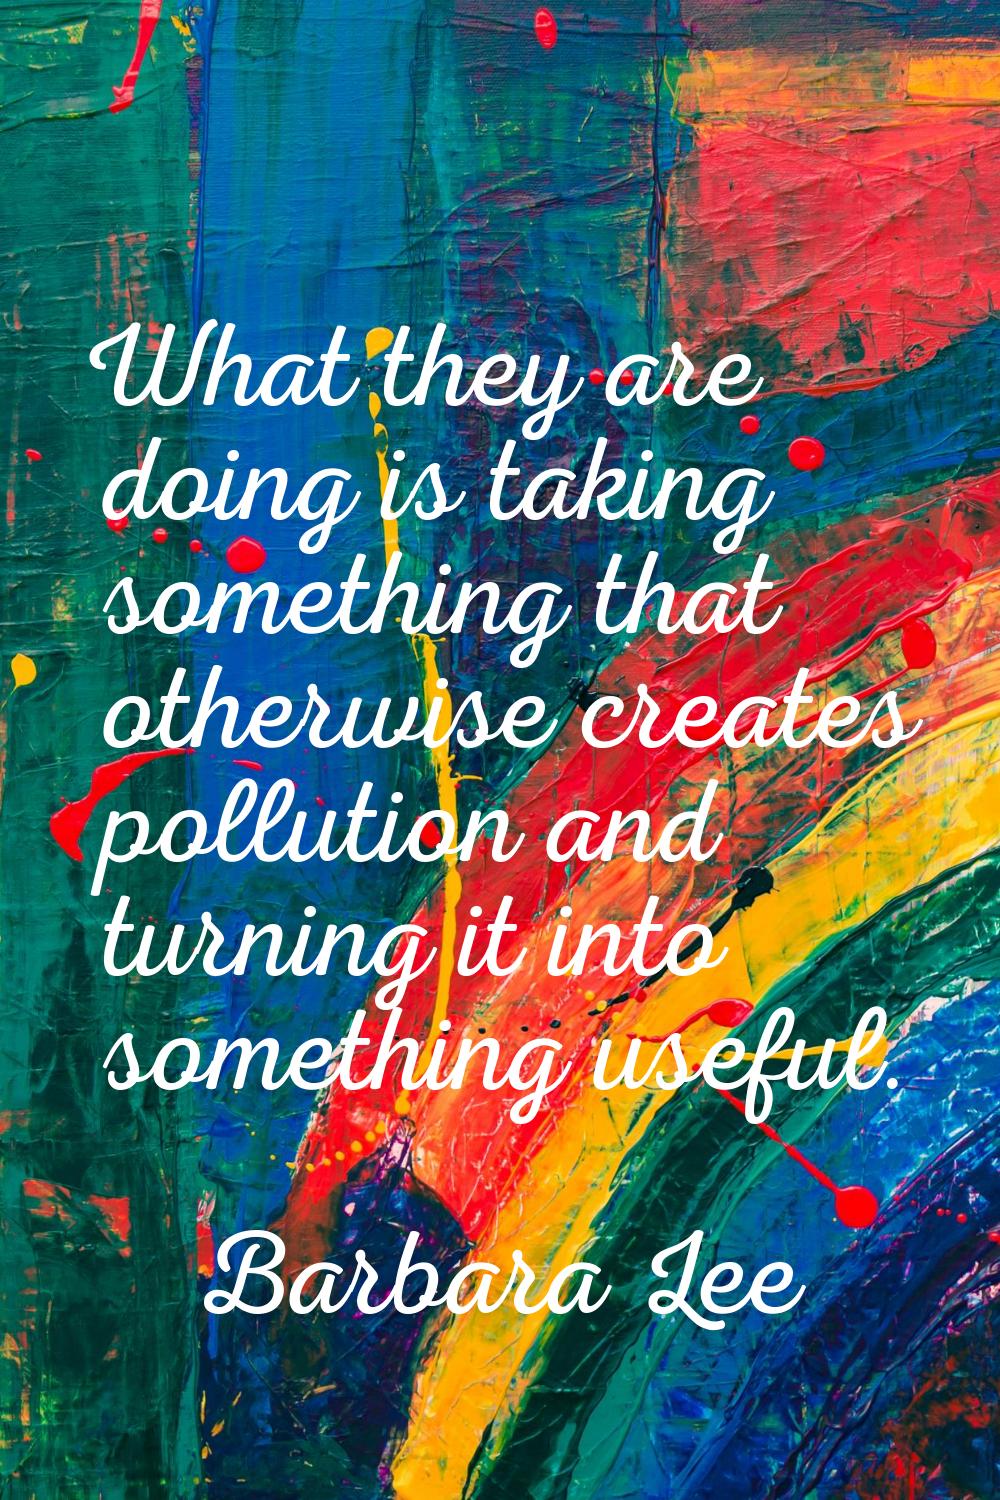 What they are doing is taking something that otherwise creates pollution and turning it into someth